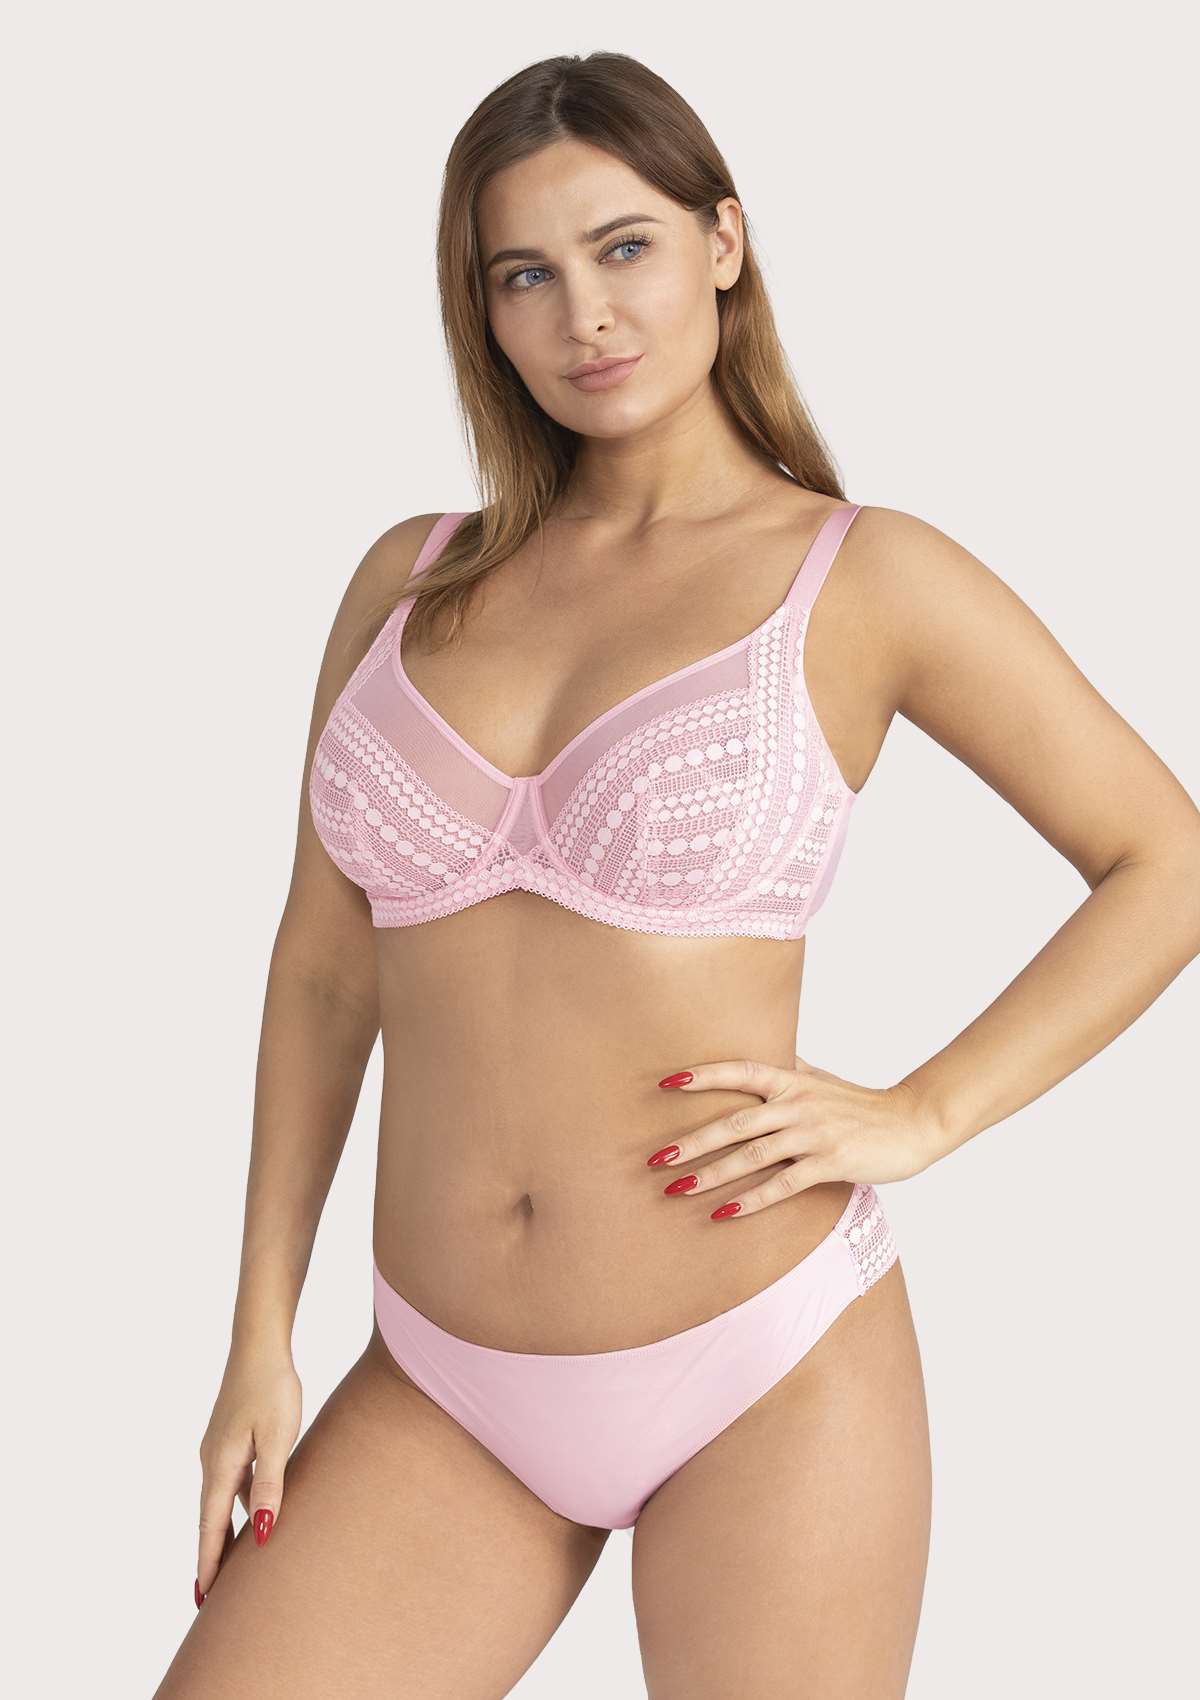 HSIA Heroine Lace Bra And Panties Set: Most Comfortable Supportive Bra - Pink / 34 / DDD/F